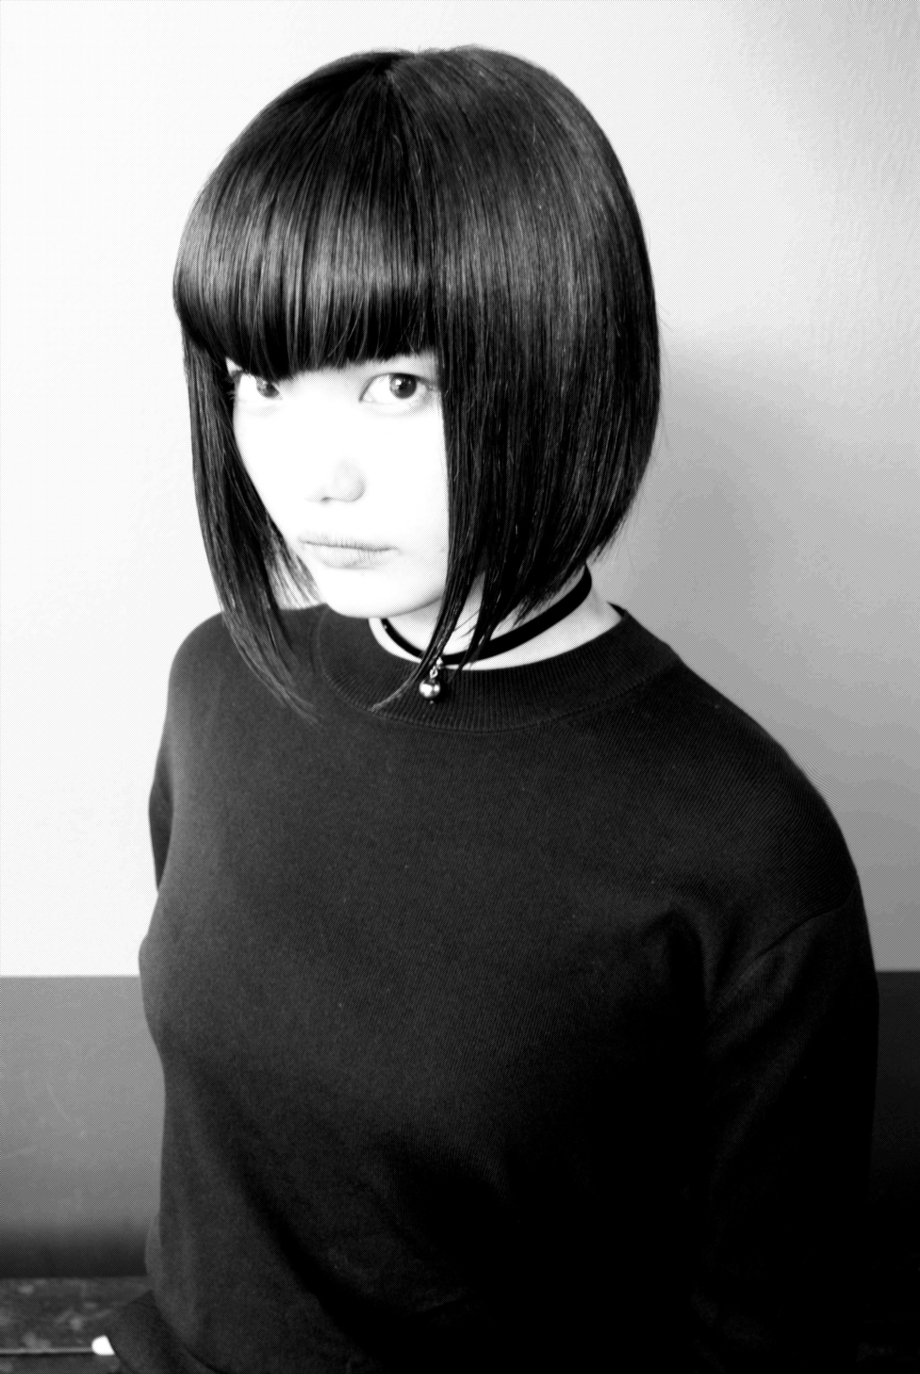 ＃Bob Hairstyles ＃Bob Haircuts ＃Best BobStyles #BELL桜新町/用賀